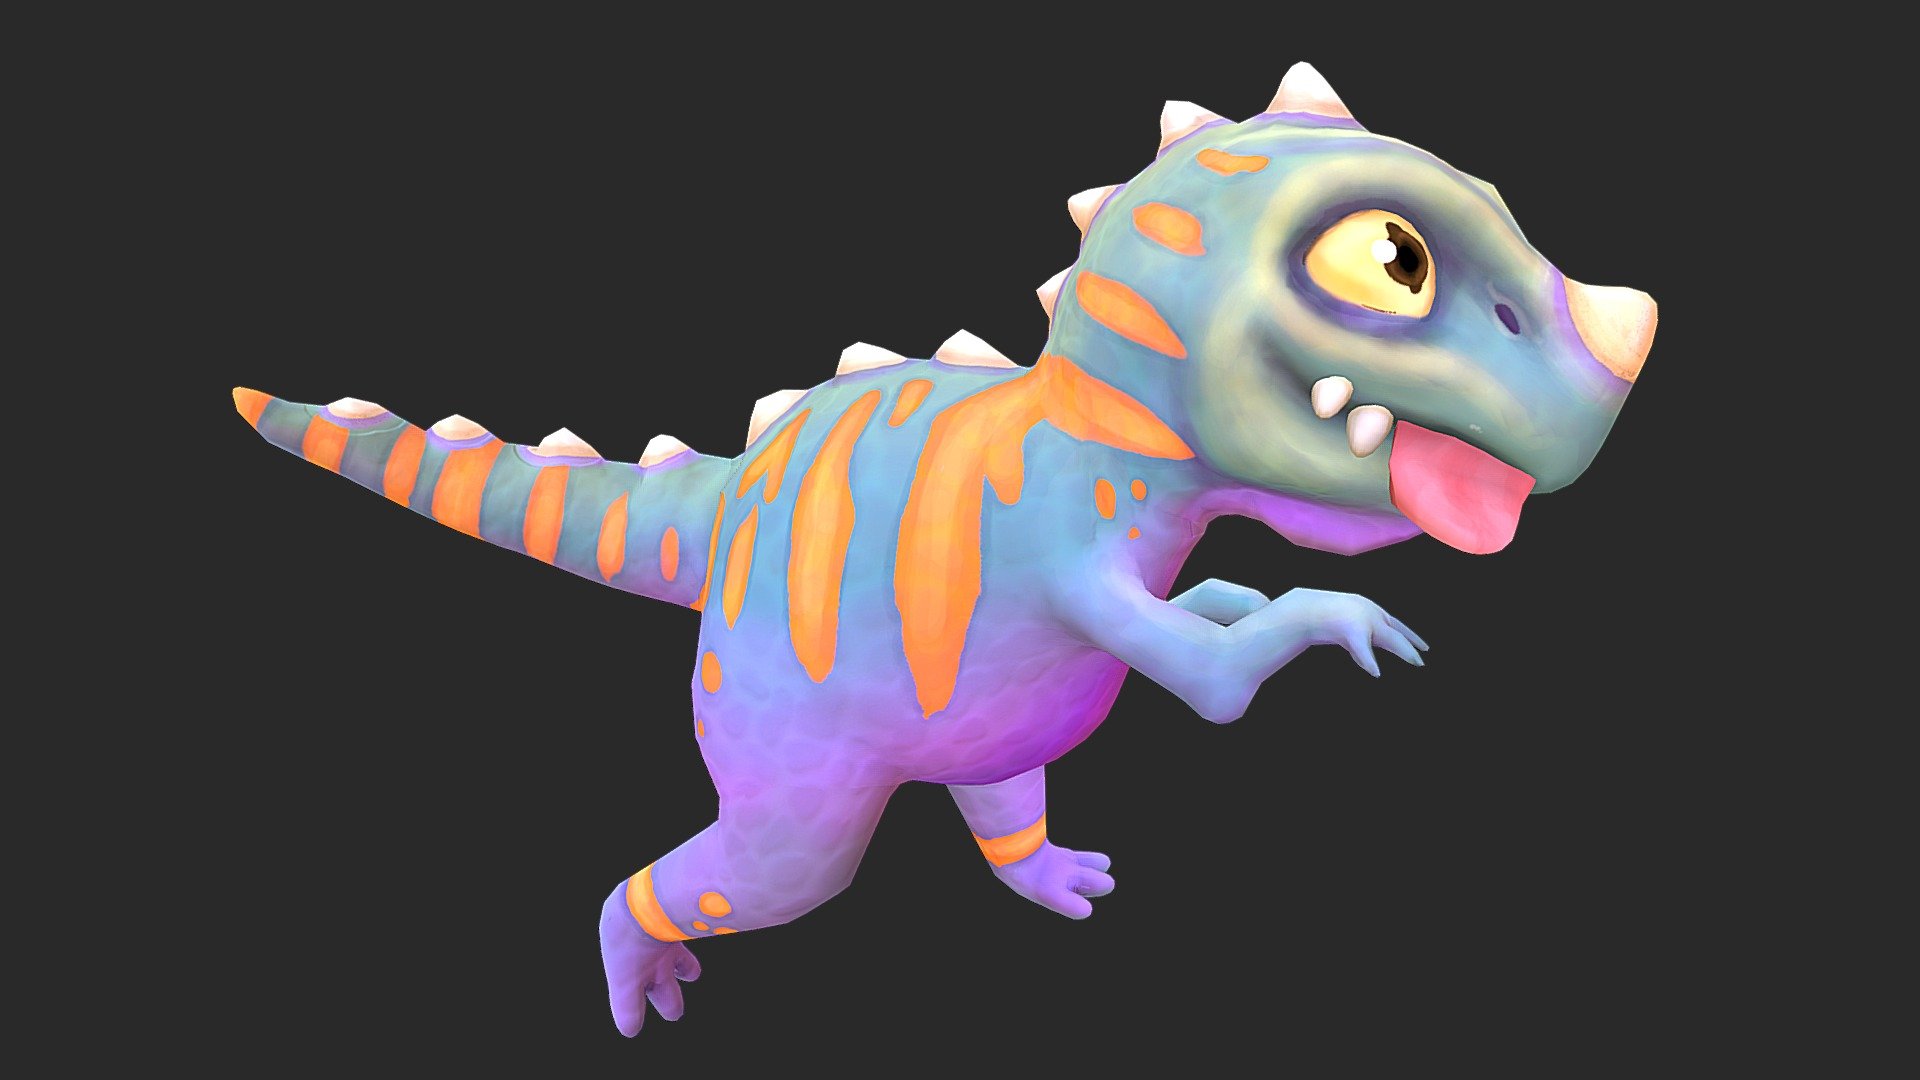 This is a baby dinosaur i made just for fun. It is hand painted, and animated as well. Hope you enjoy. I'll send original Maya file if needed 3d model